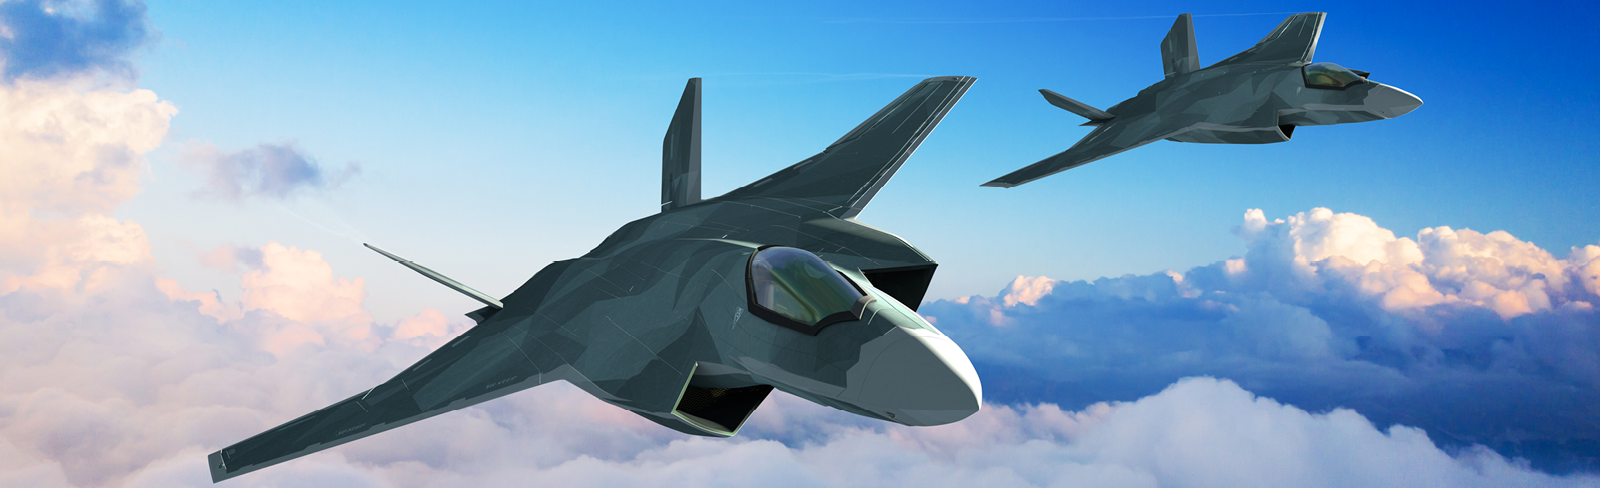 Concept image of the GCAP stealth aircraft flying above the clouds